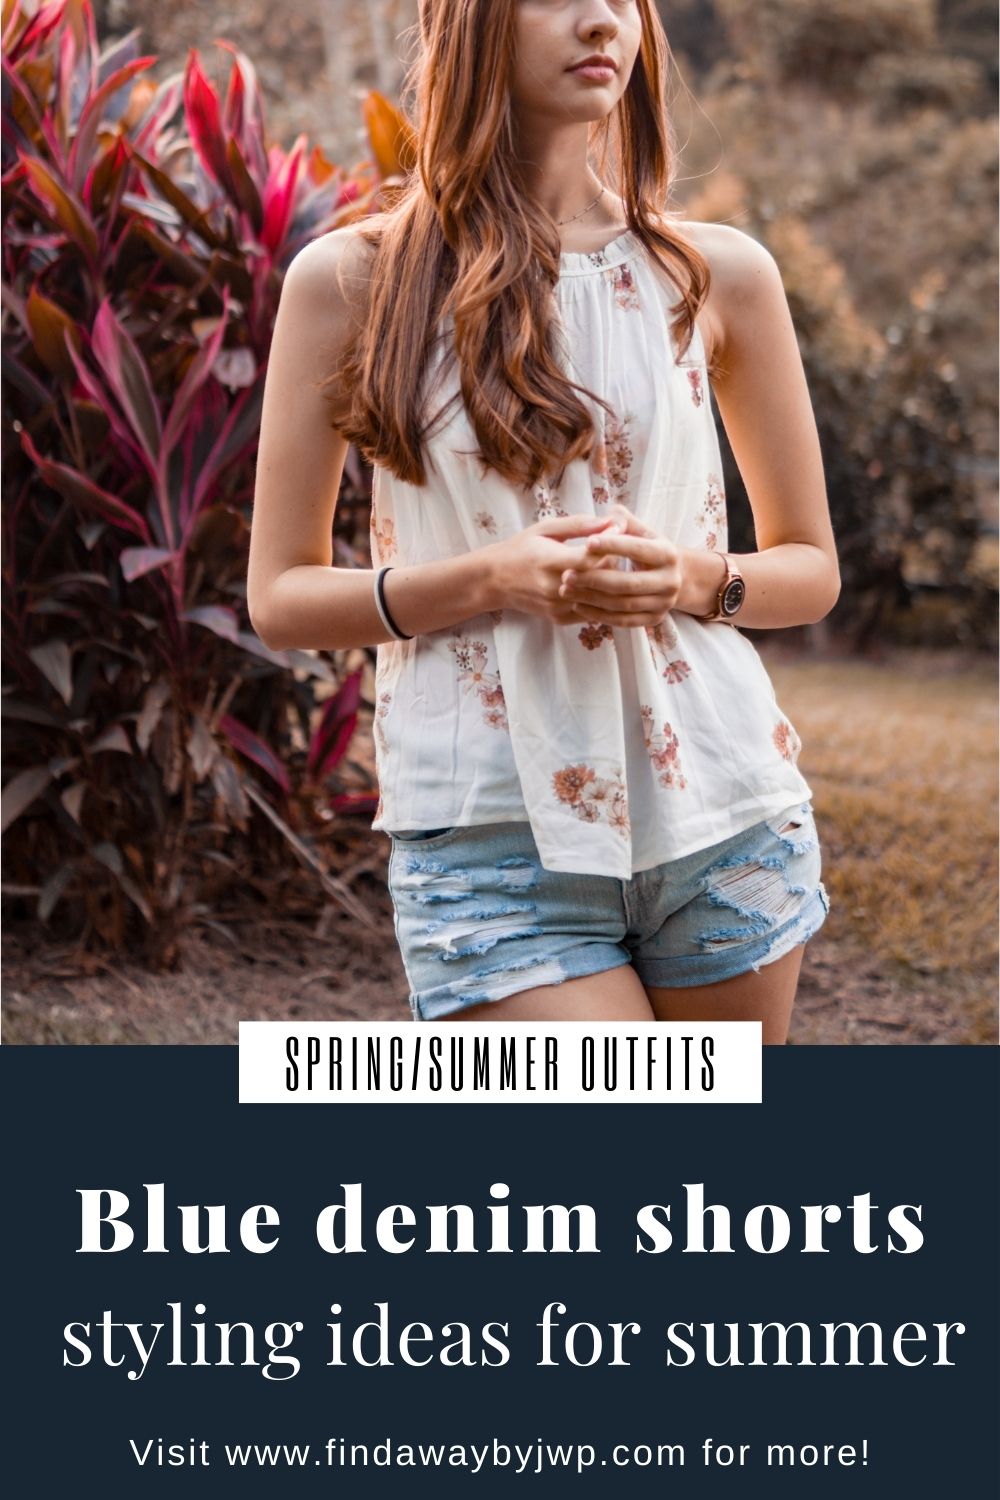 Blue denim shorts outfits for summer - Find A Way by JWP